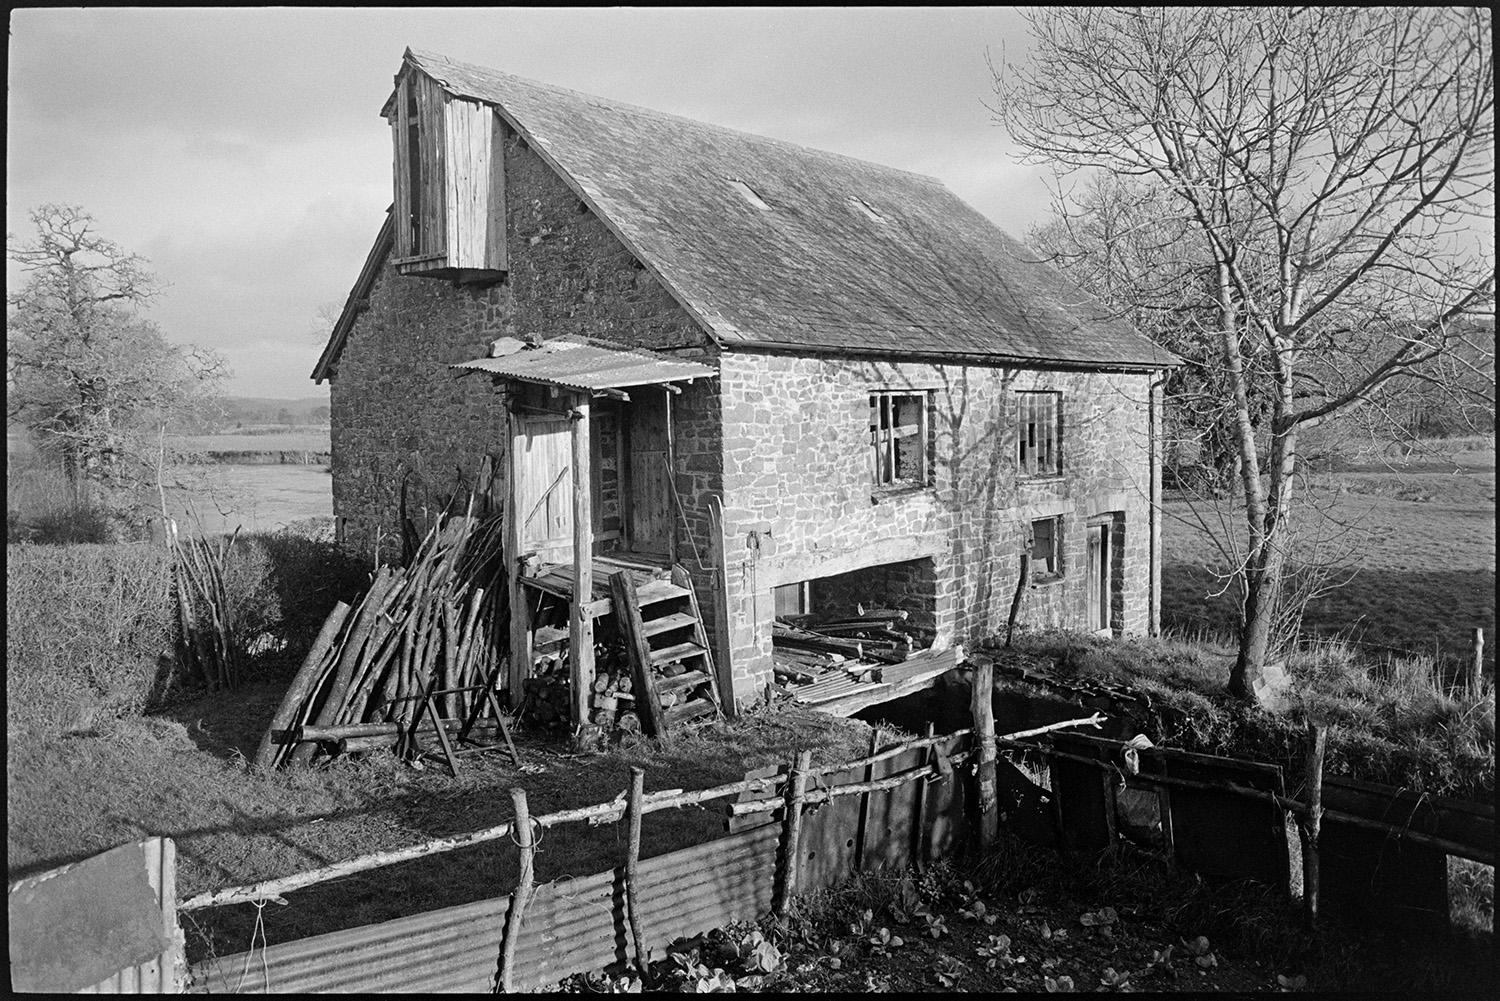 Views inside and outside of mill showing wheel and machinery and workshop. Stored nitches thatch.<br />
[Exterior view of Rashleigh Mill, Bridge Reeve, with a wood pile leaning against the end wall and a vegetable garden in front of the Mill. A set of wooden steps also leads up to the first floor of the mill.]